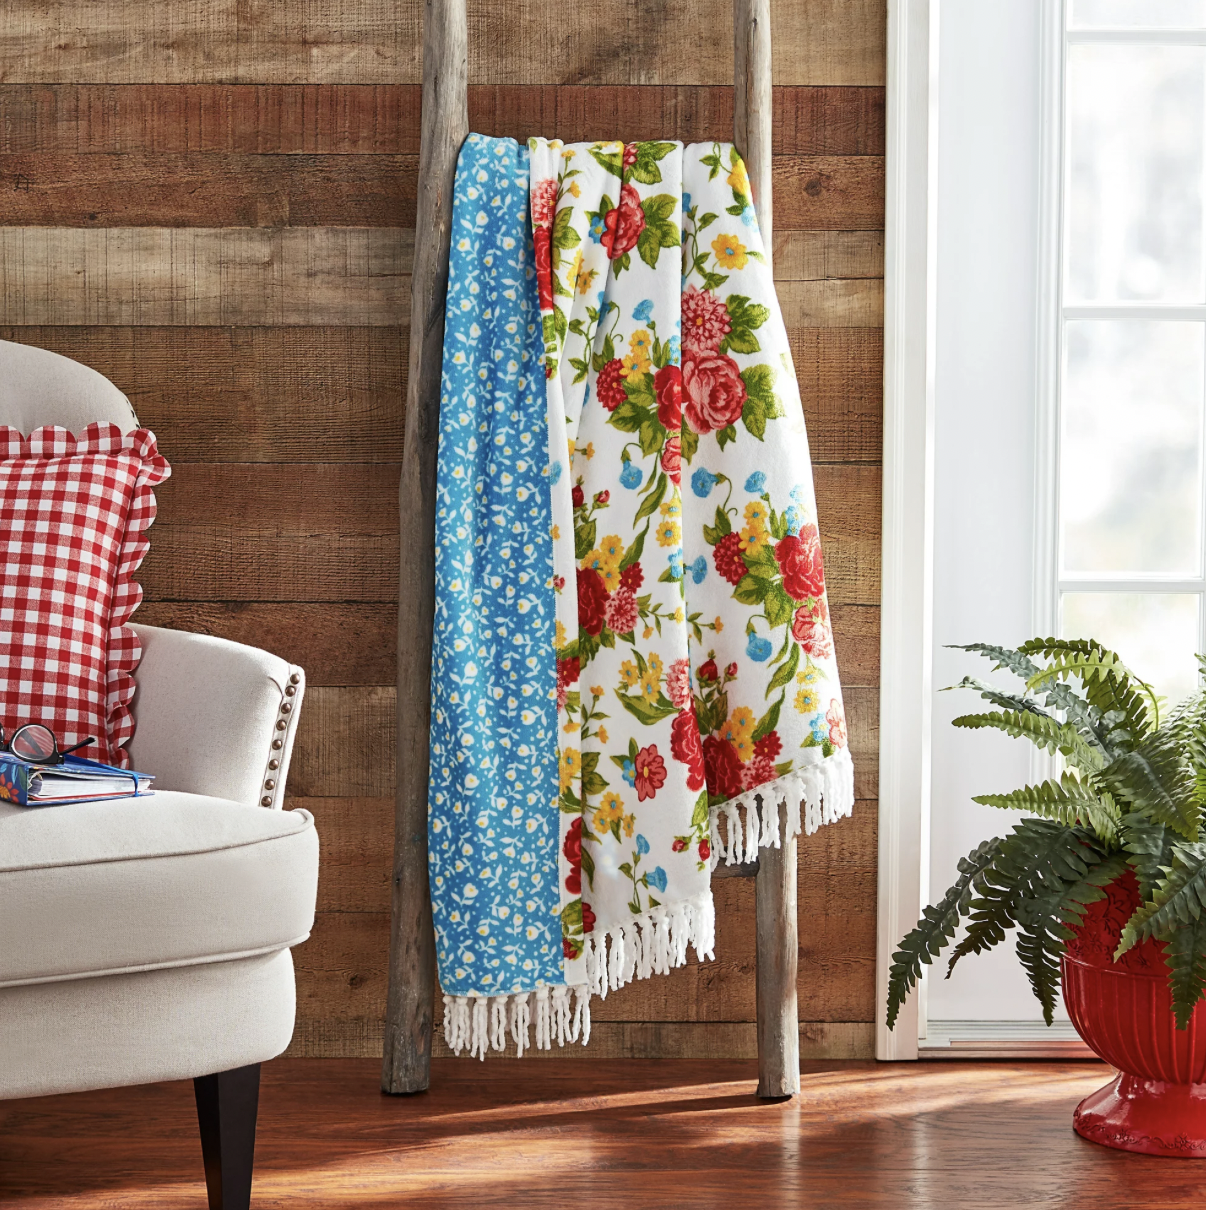 7 Throw Blanket Styling Tips - Showit Blog